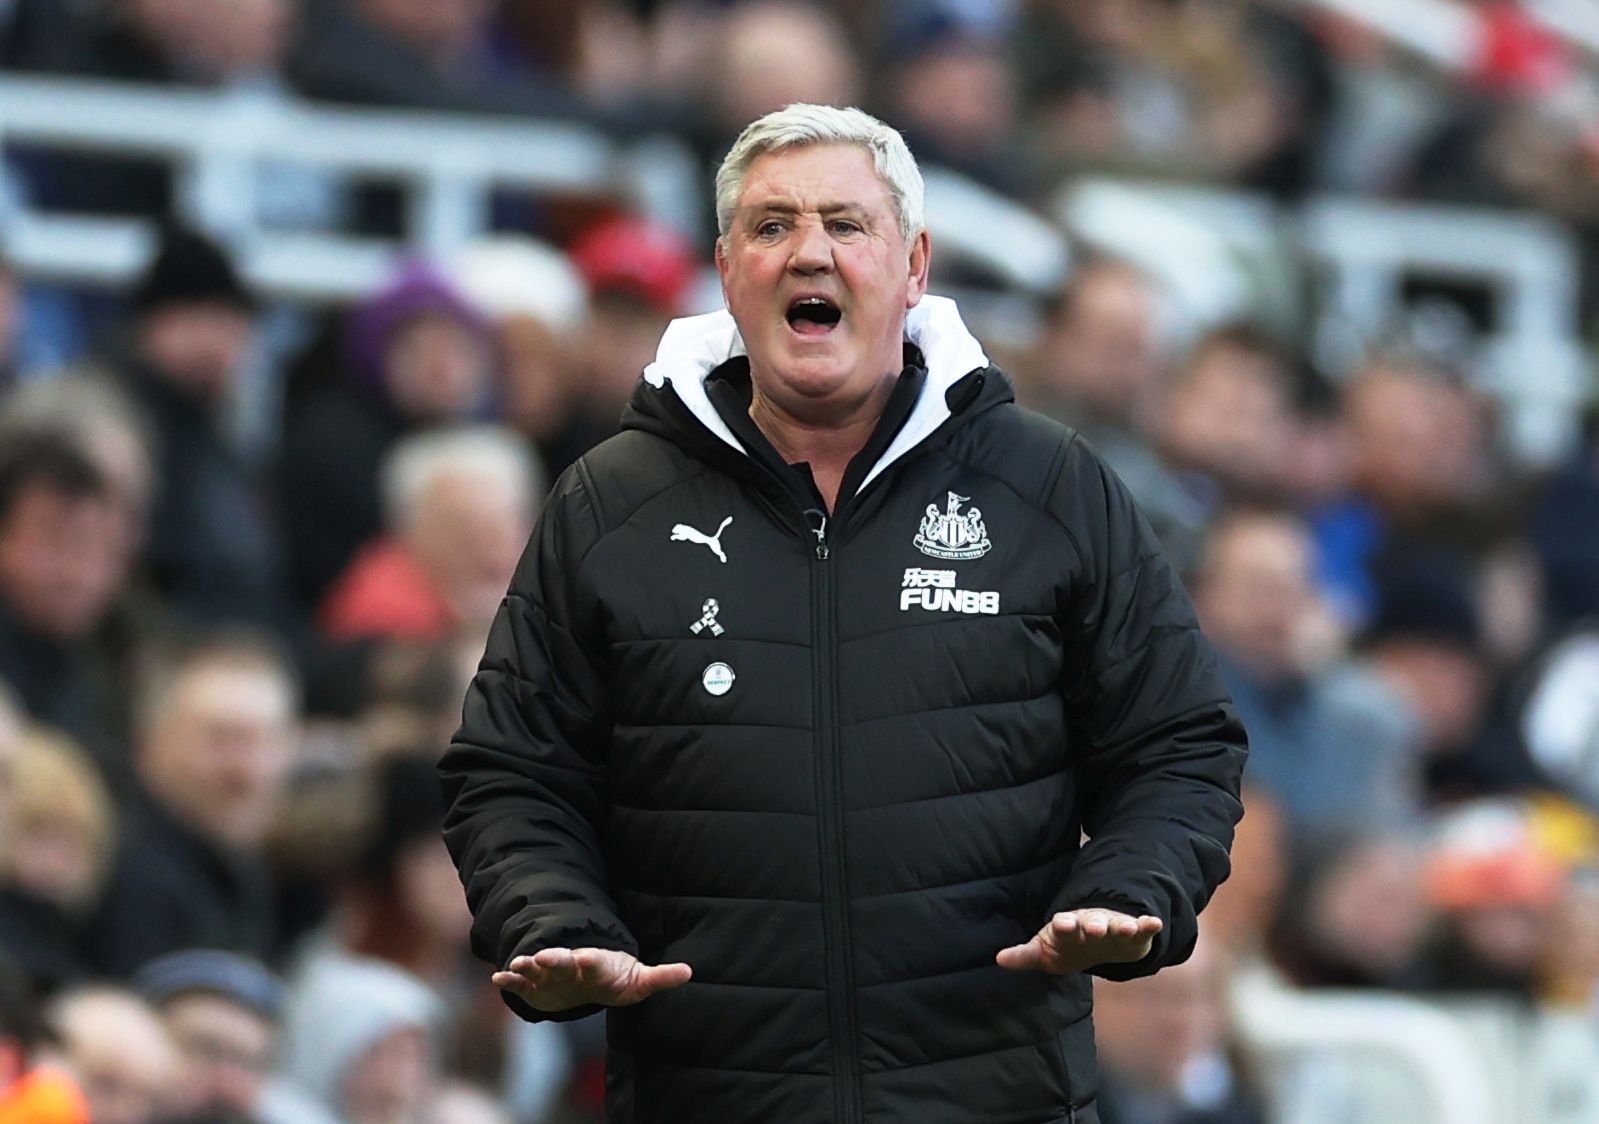 Soccer Football - Premier League - Newcastle United v Burnley - St James' Park, Newcastle, Britain - February 29, 2020  Newcastle United manager Steve Bruce reacts  Action Images via Reuters/Carl Recine  EDITORIAL USE ONLY. No use with unauthorized audio, video, data, fixture lists, club/league logos or 